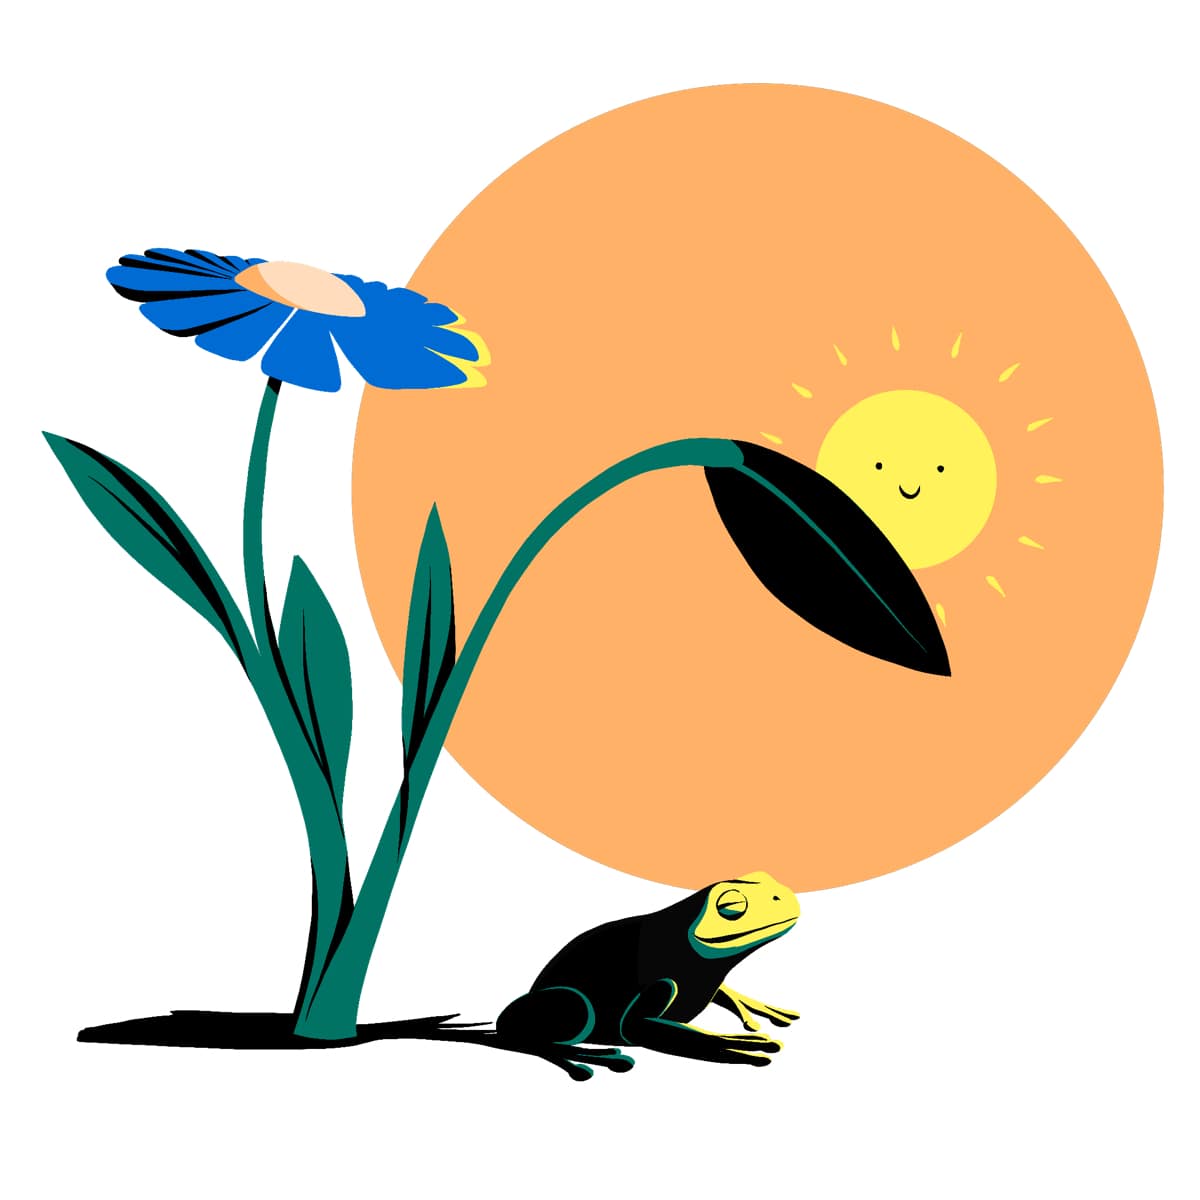 a frog enjoys sunshine and shade from a flower.